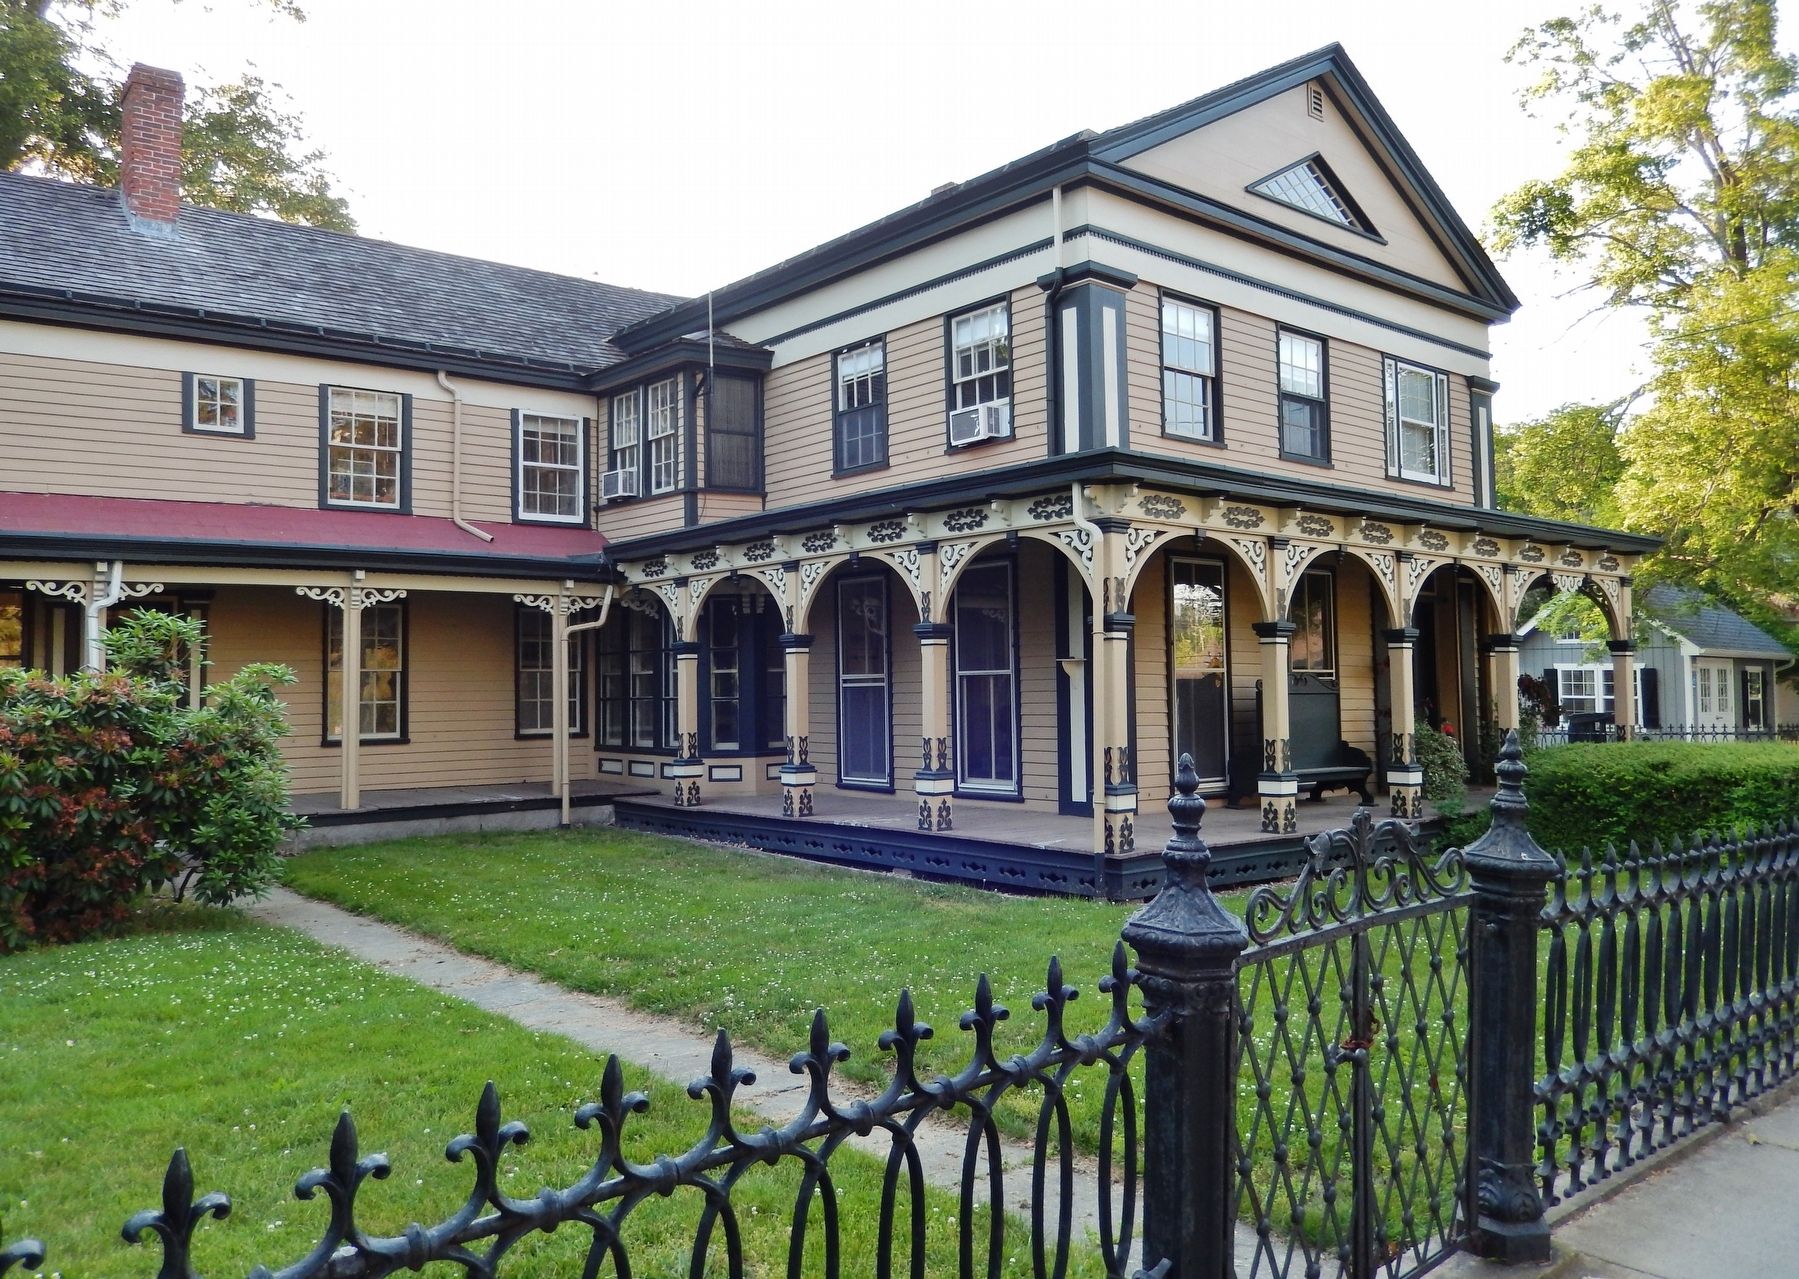 Clark Greenman House (<i>cast-iron fence was put up about 1866</i>) image. Click for full size.